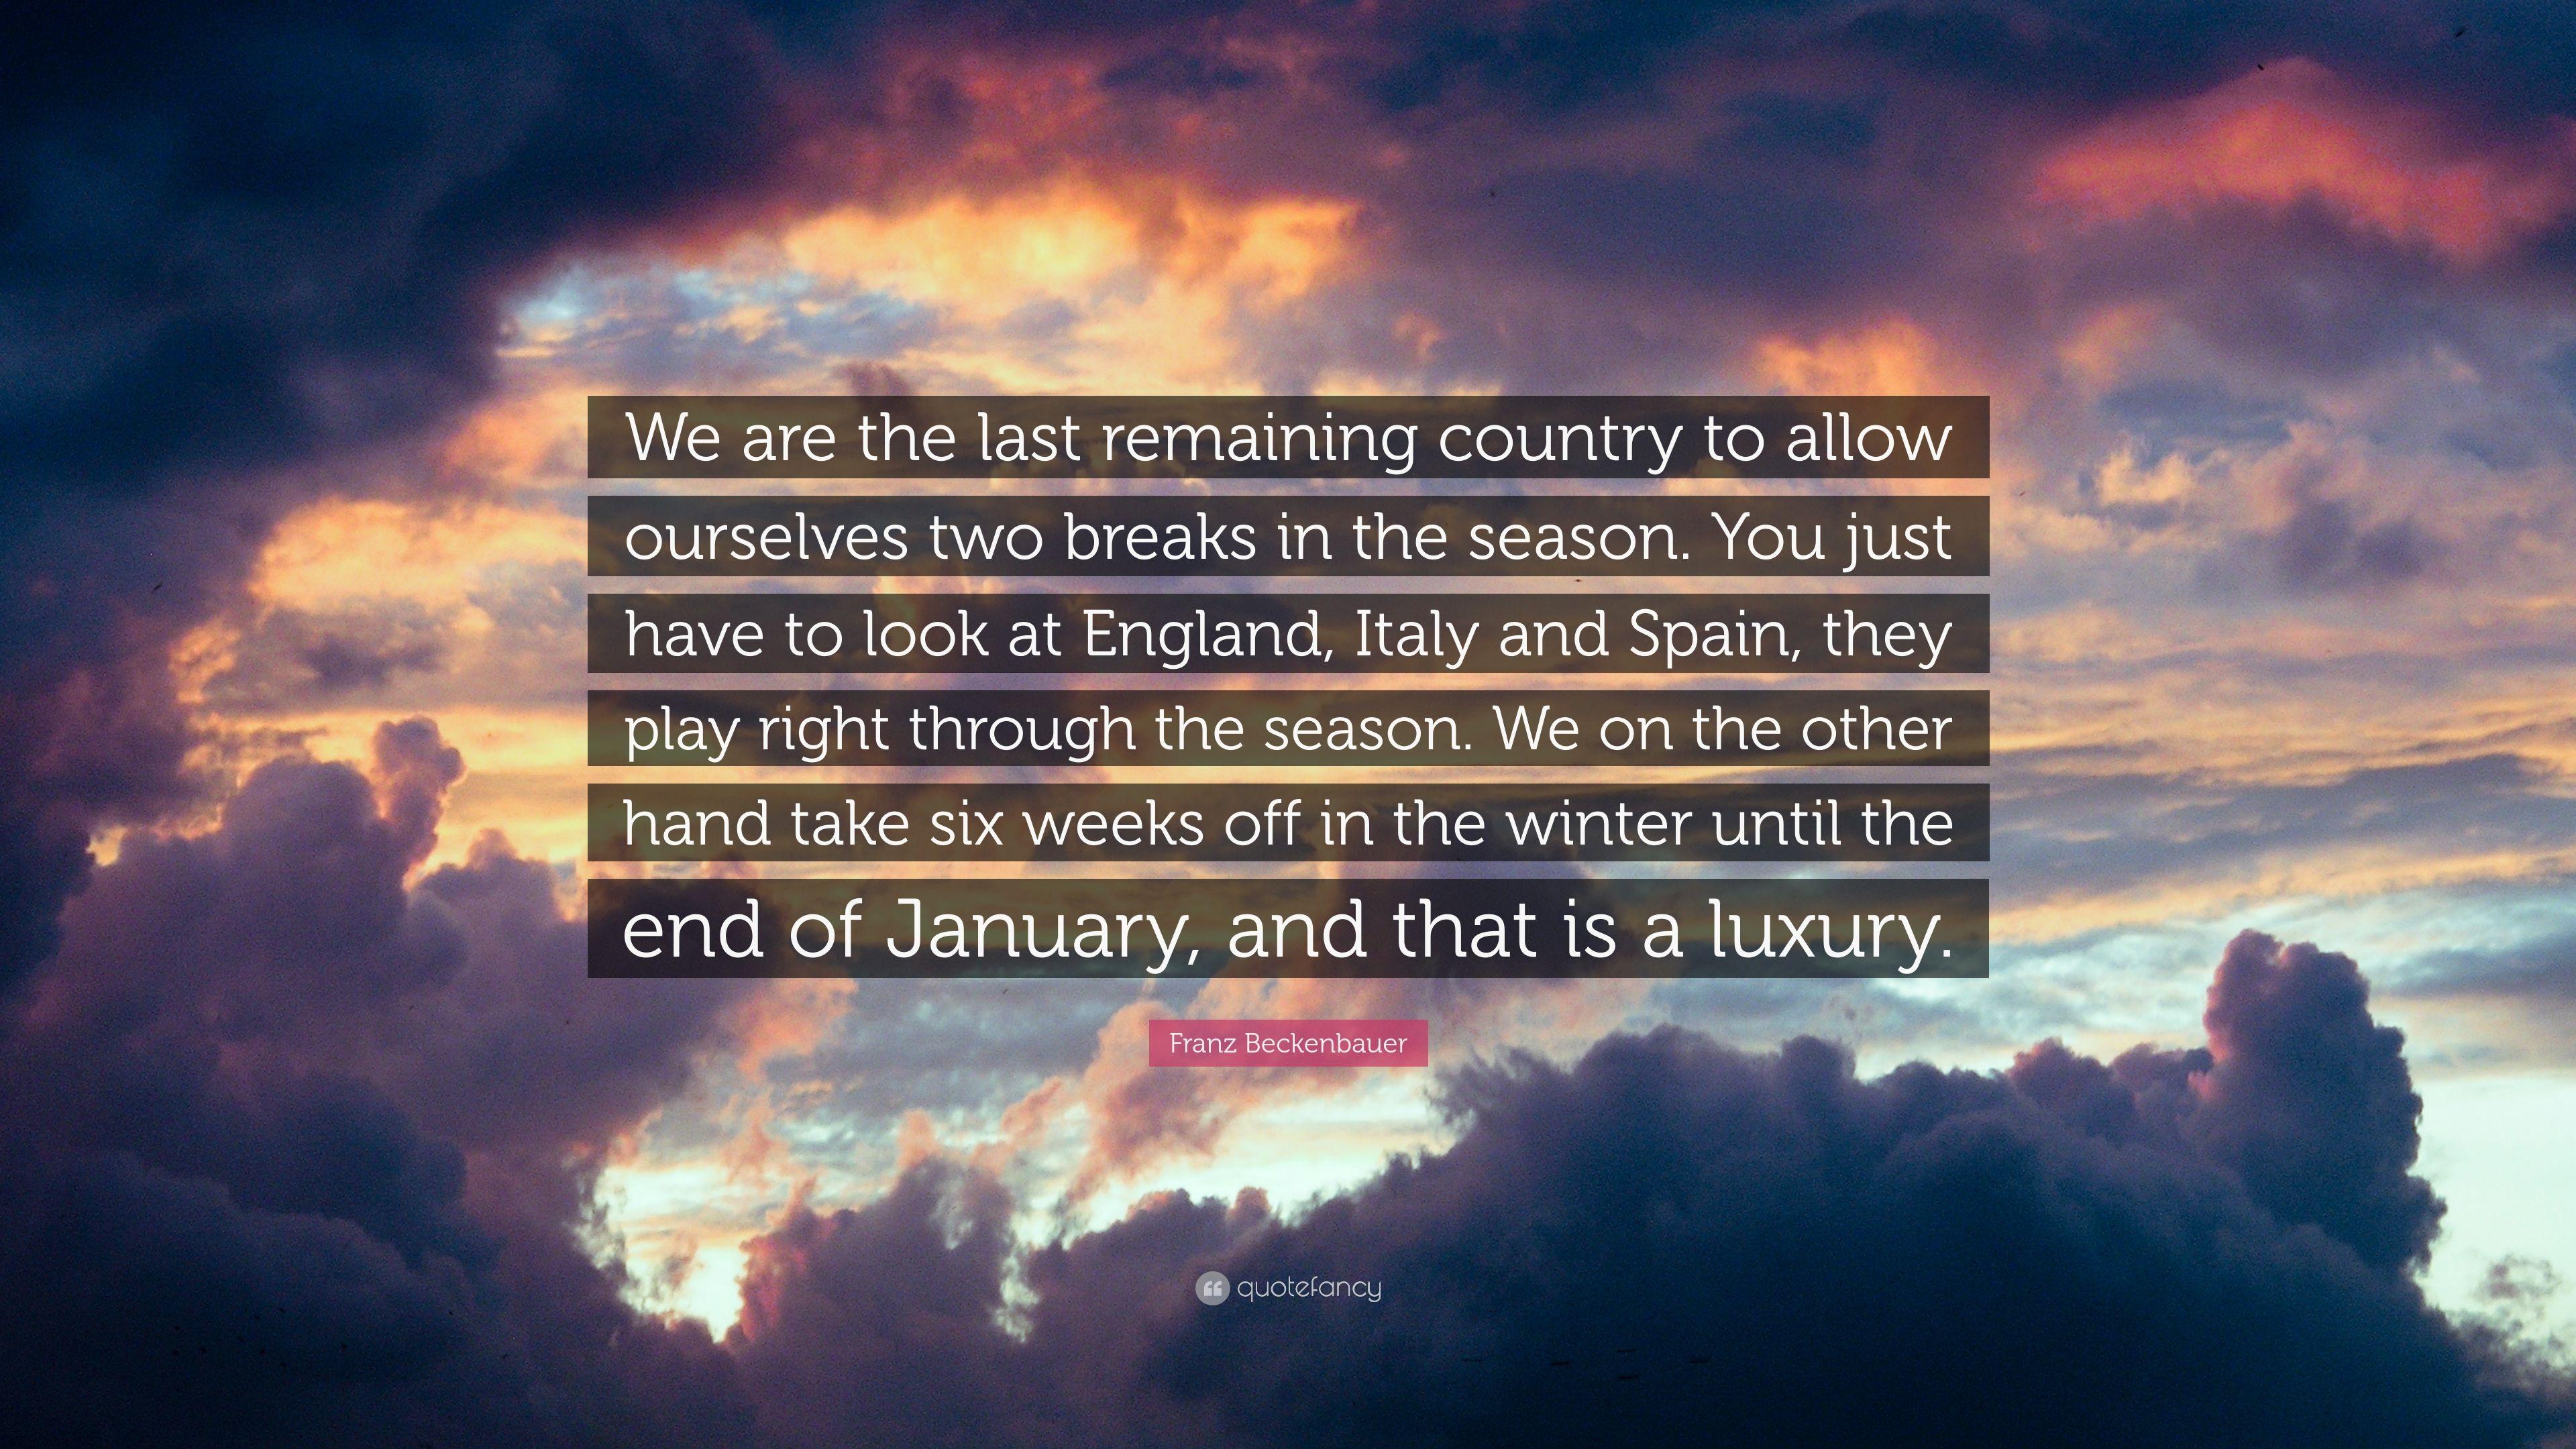 Franz Beckenbauer Quote: “We are the last remaining country to allow